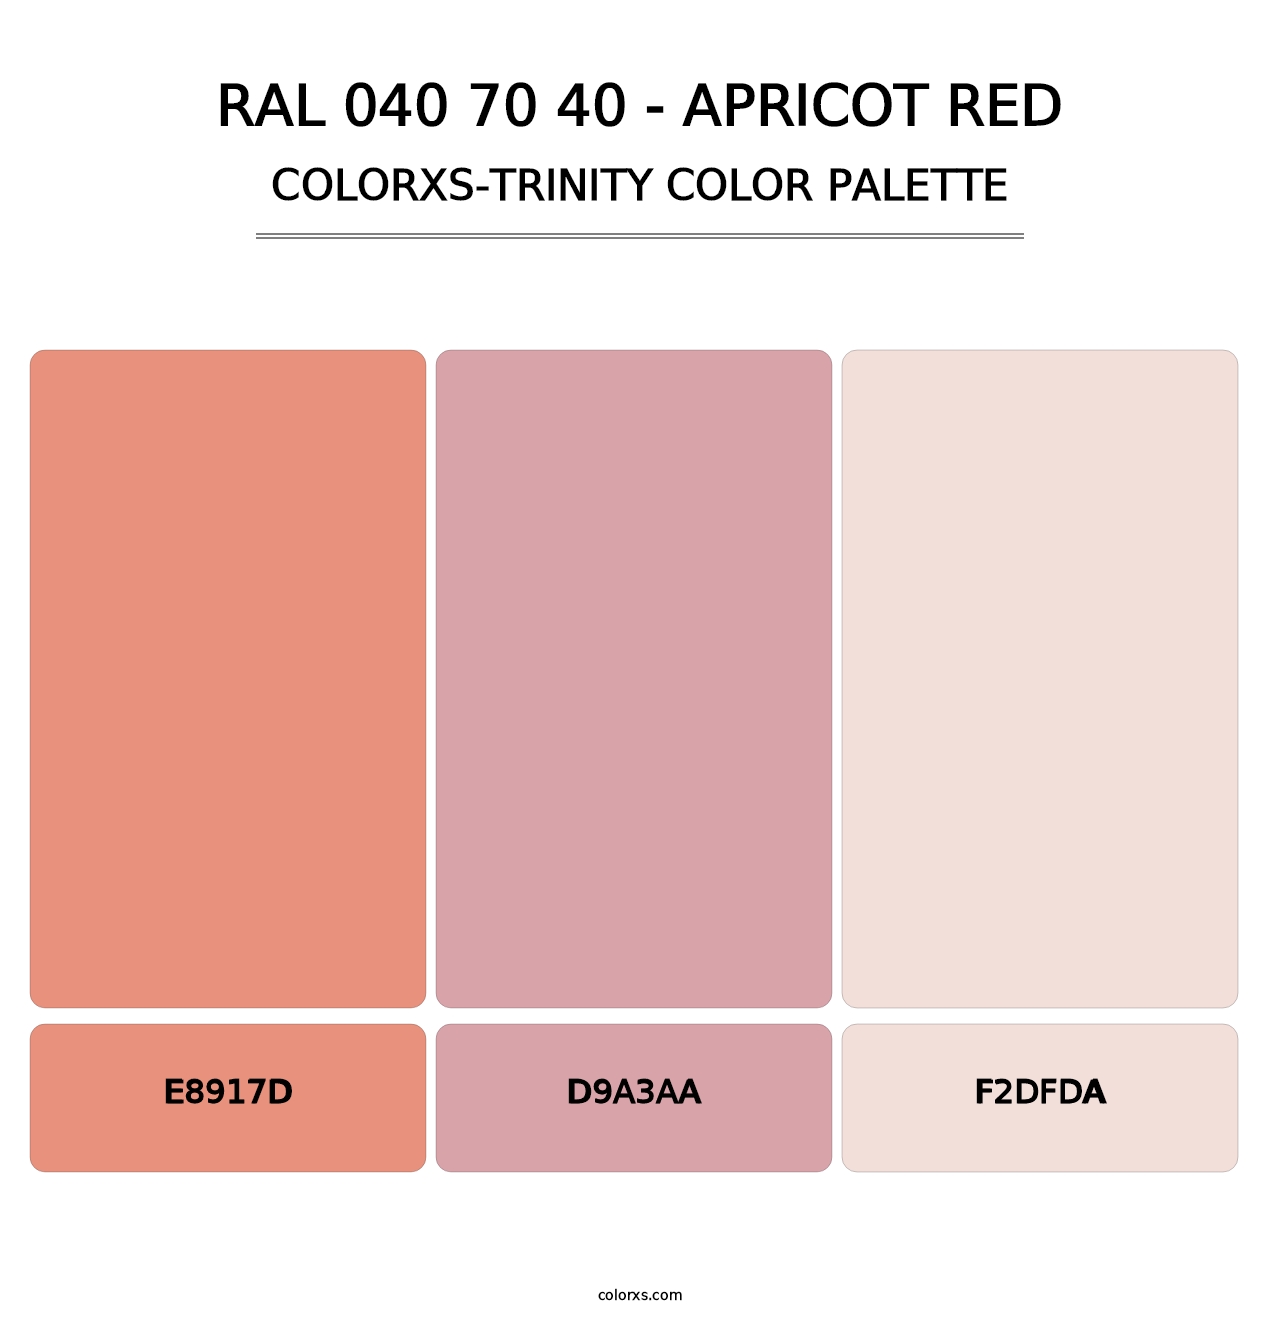 RAL 040 70 40 - Apricot Red - Colorxs Trinity Palette